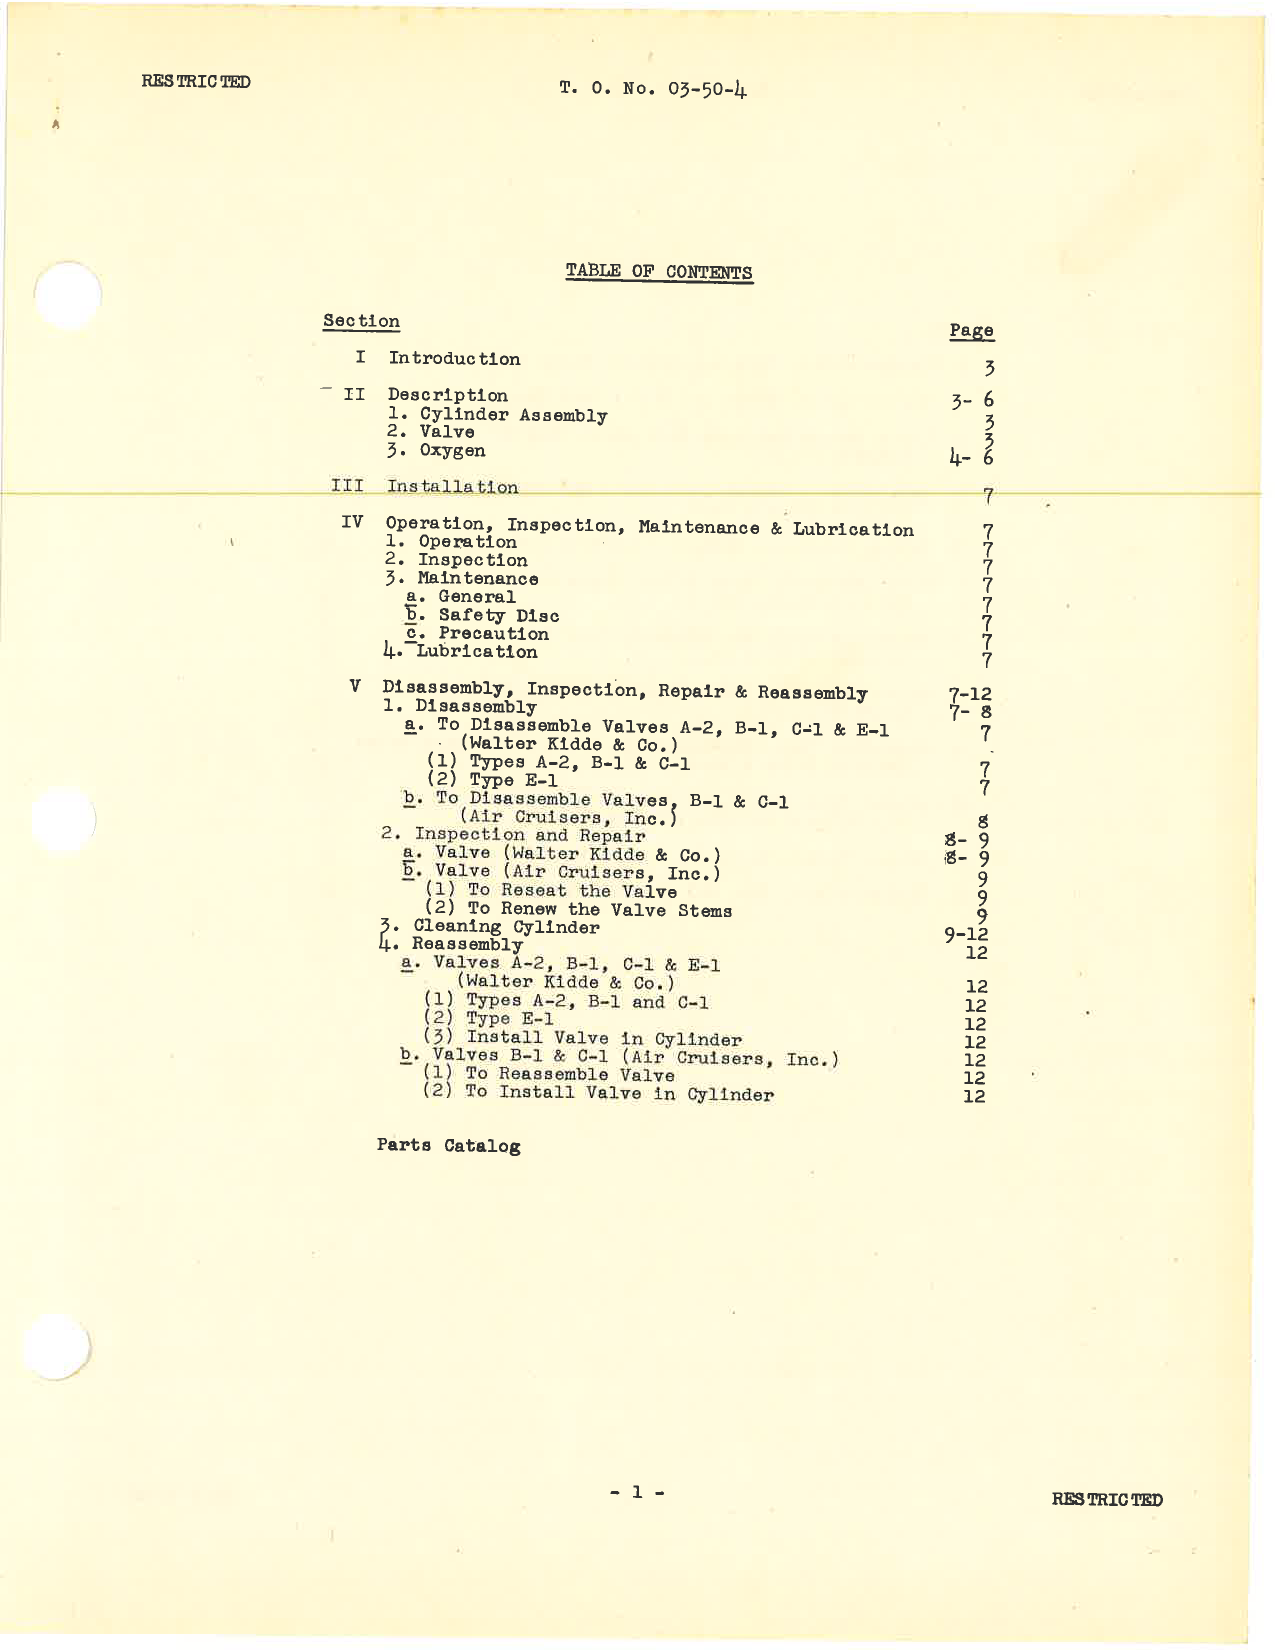 Sample page 3 from AirCorps Library document: Handbook of Instructions with Parts Catalog for Oxygen Cylinders